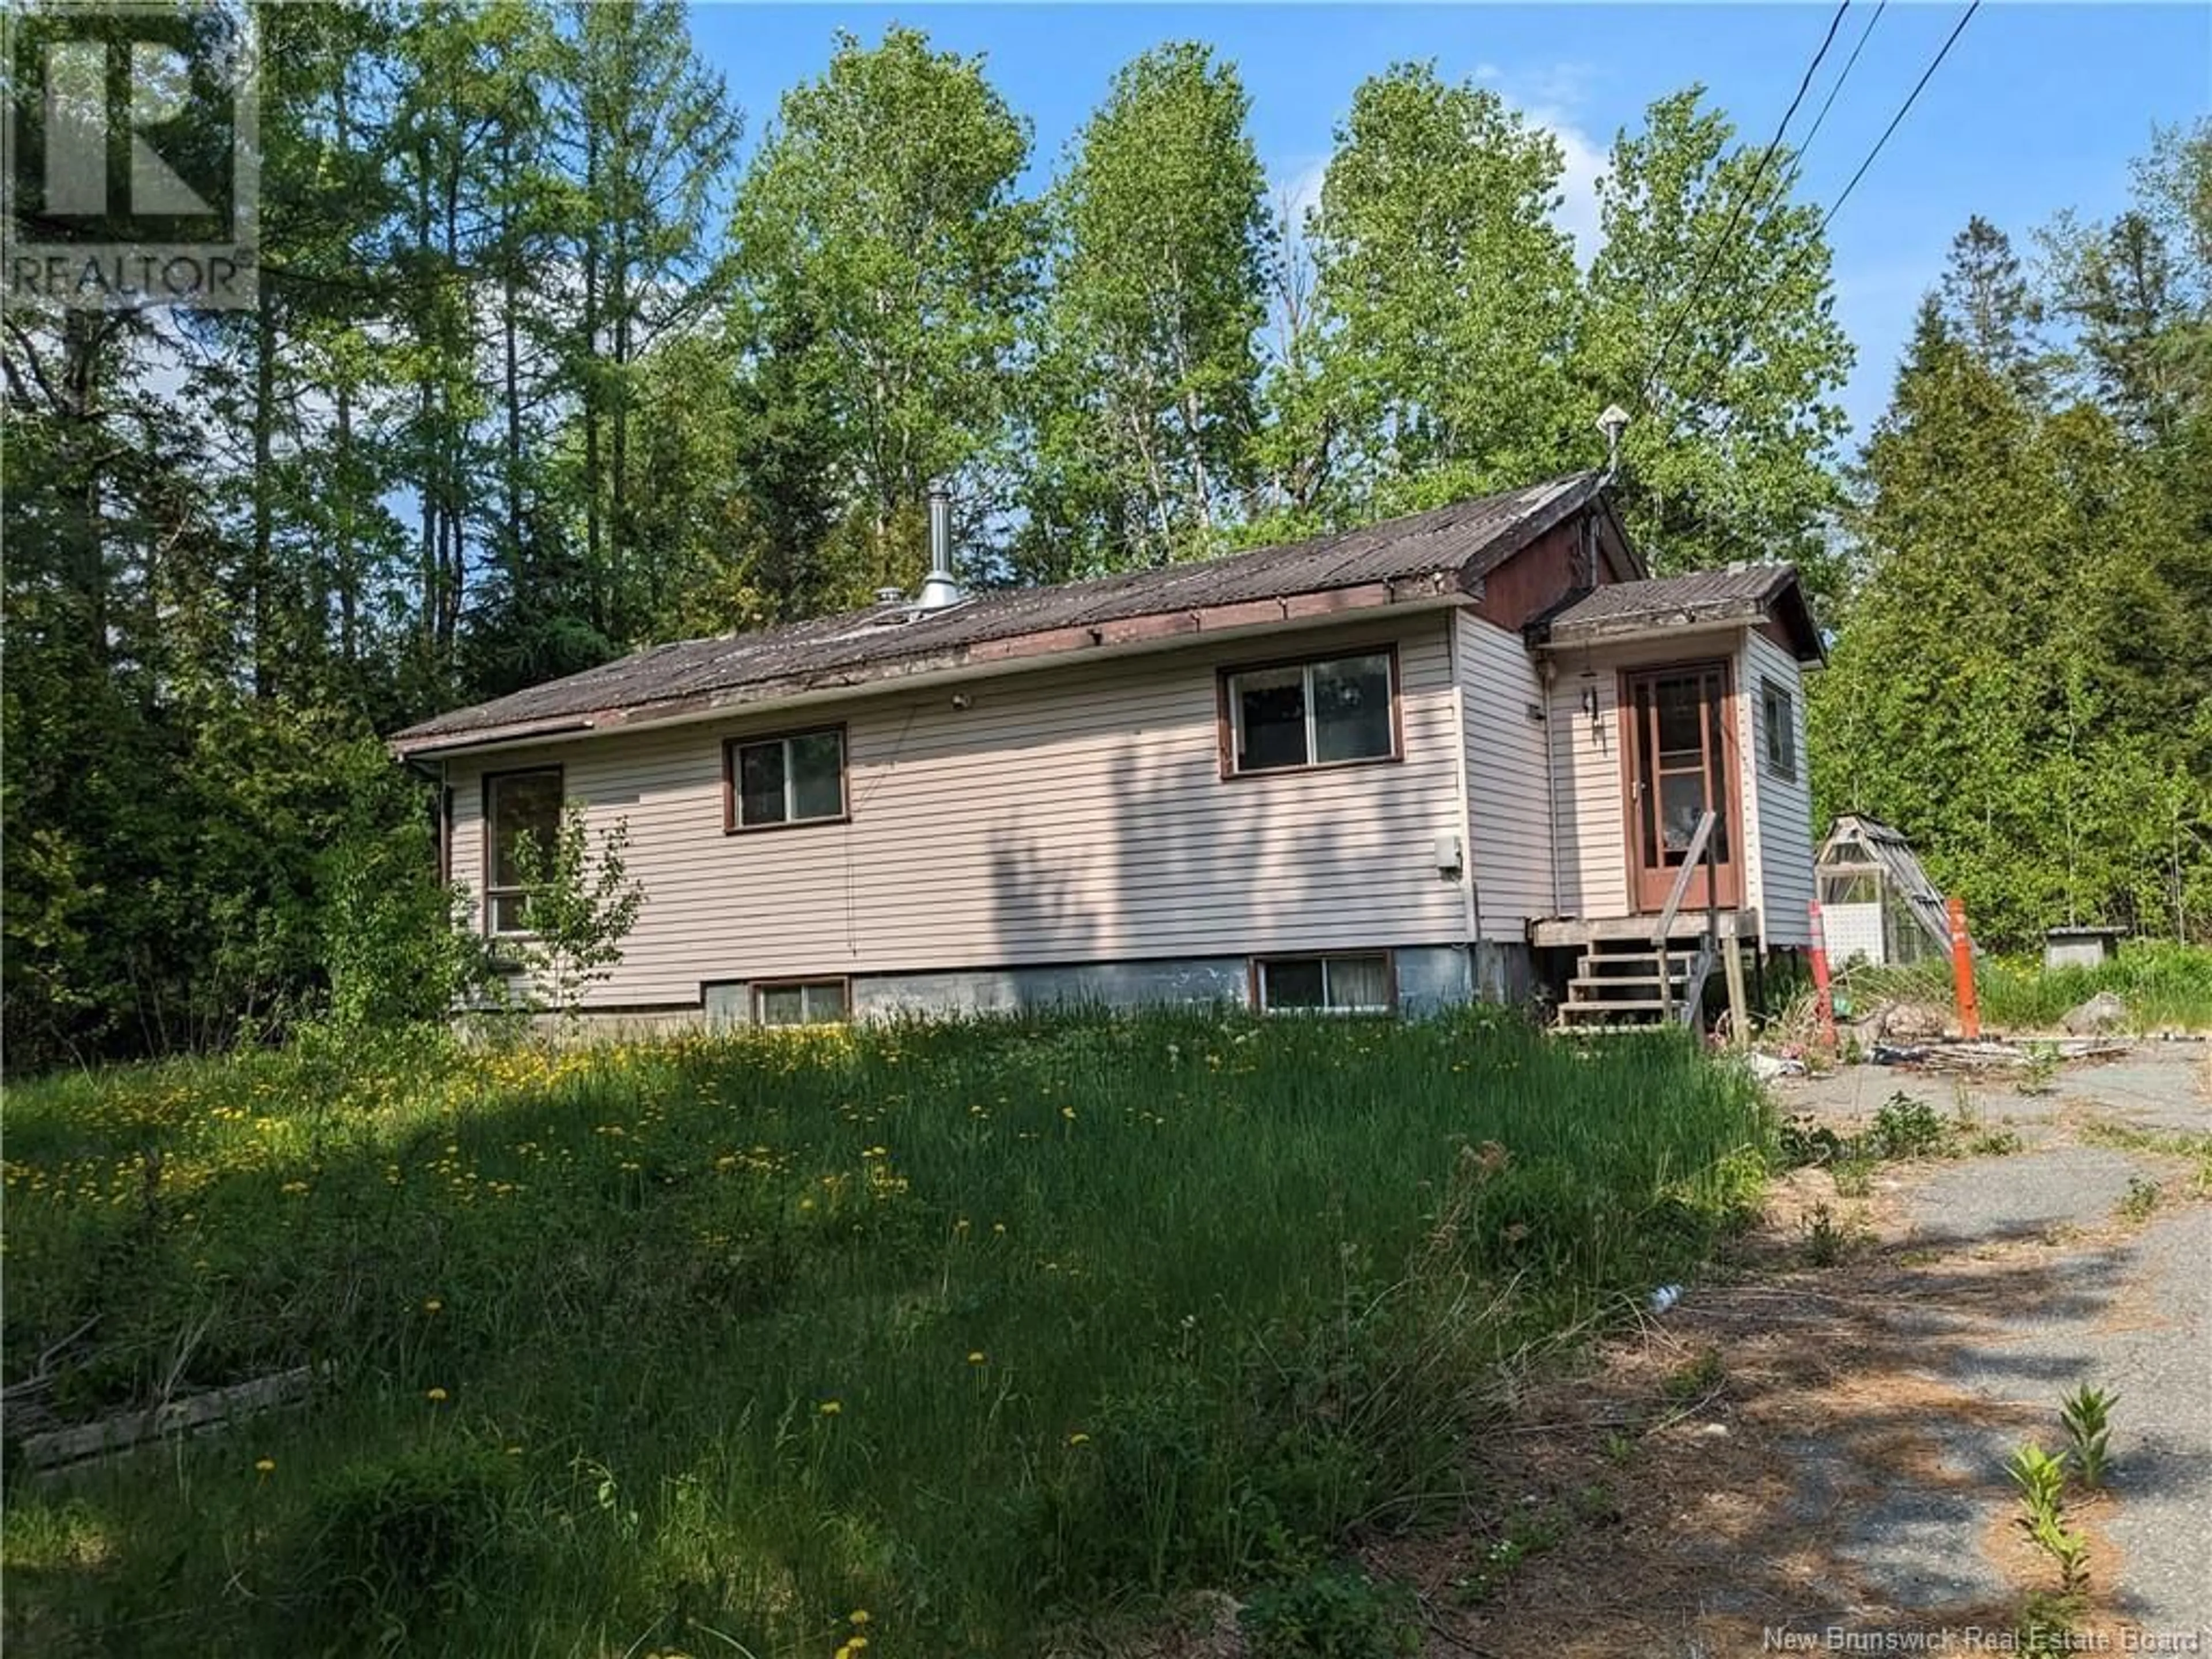 Cottage for 700 Route 750, Moores Mills New Brunswick E5A2A4